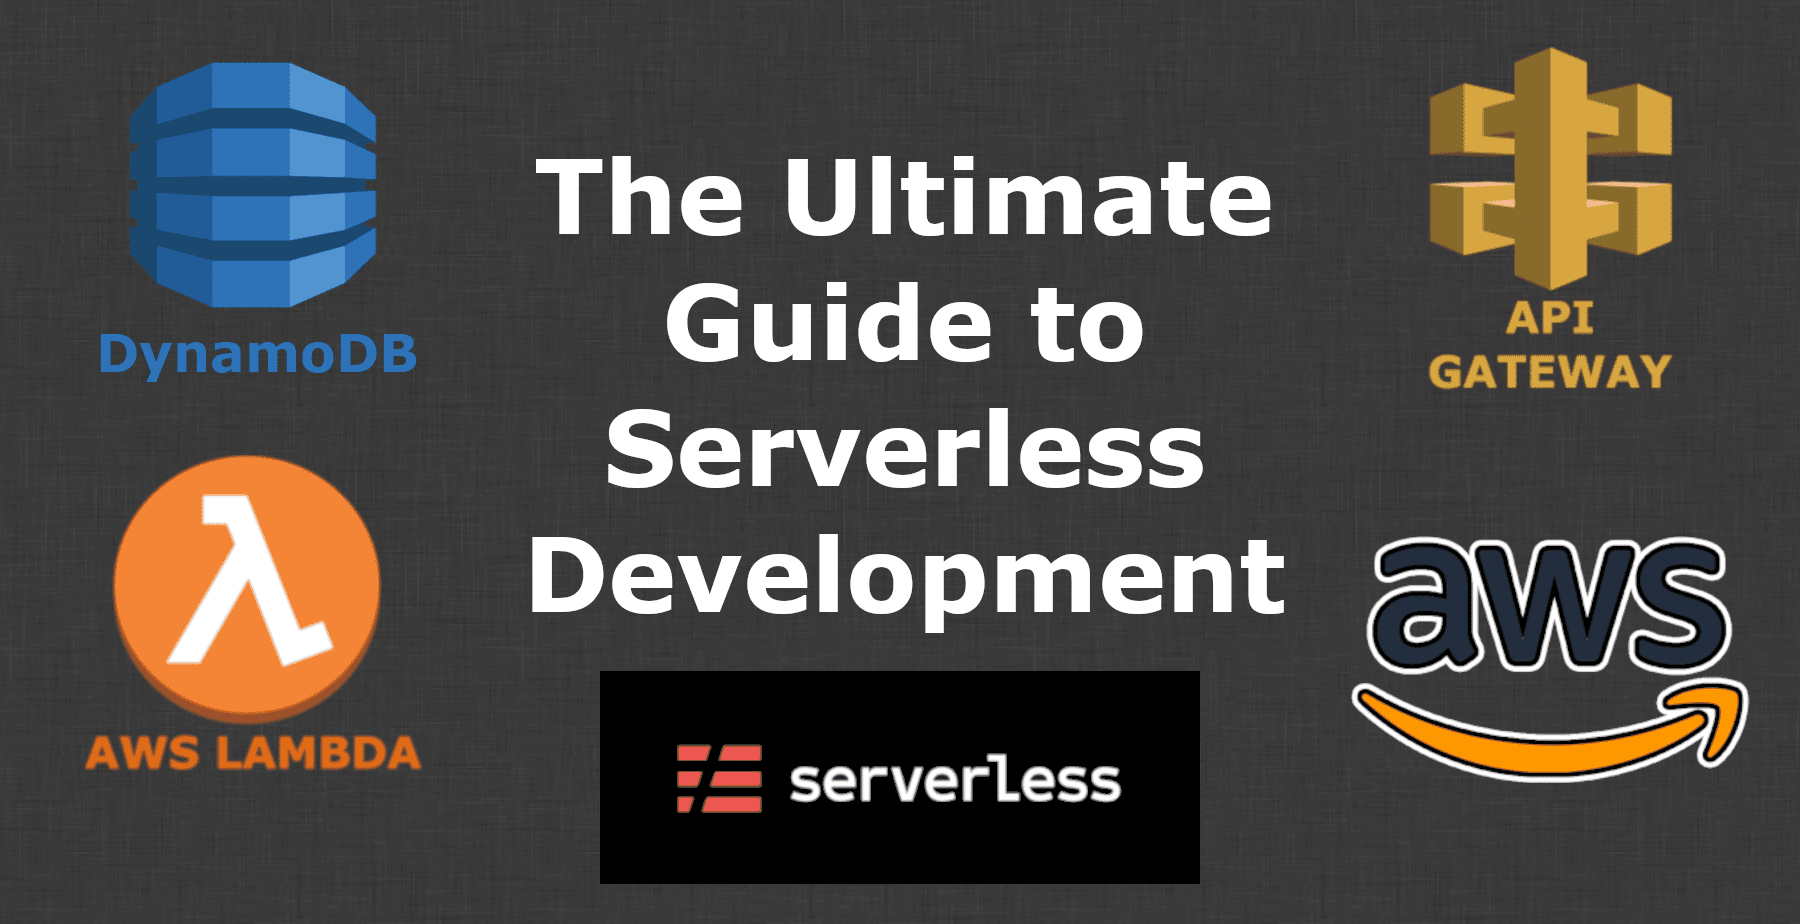 The Ultimate Guide to Serverless Development